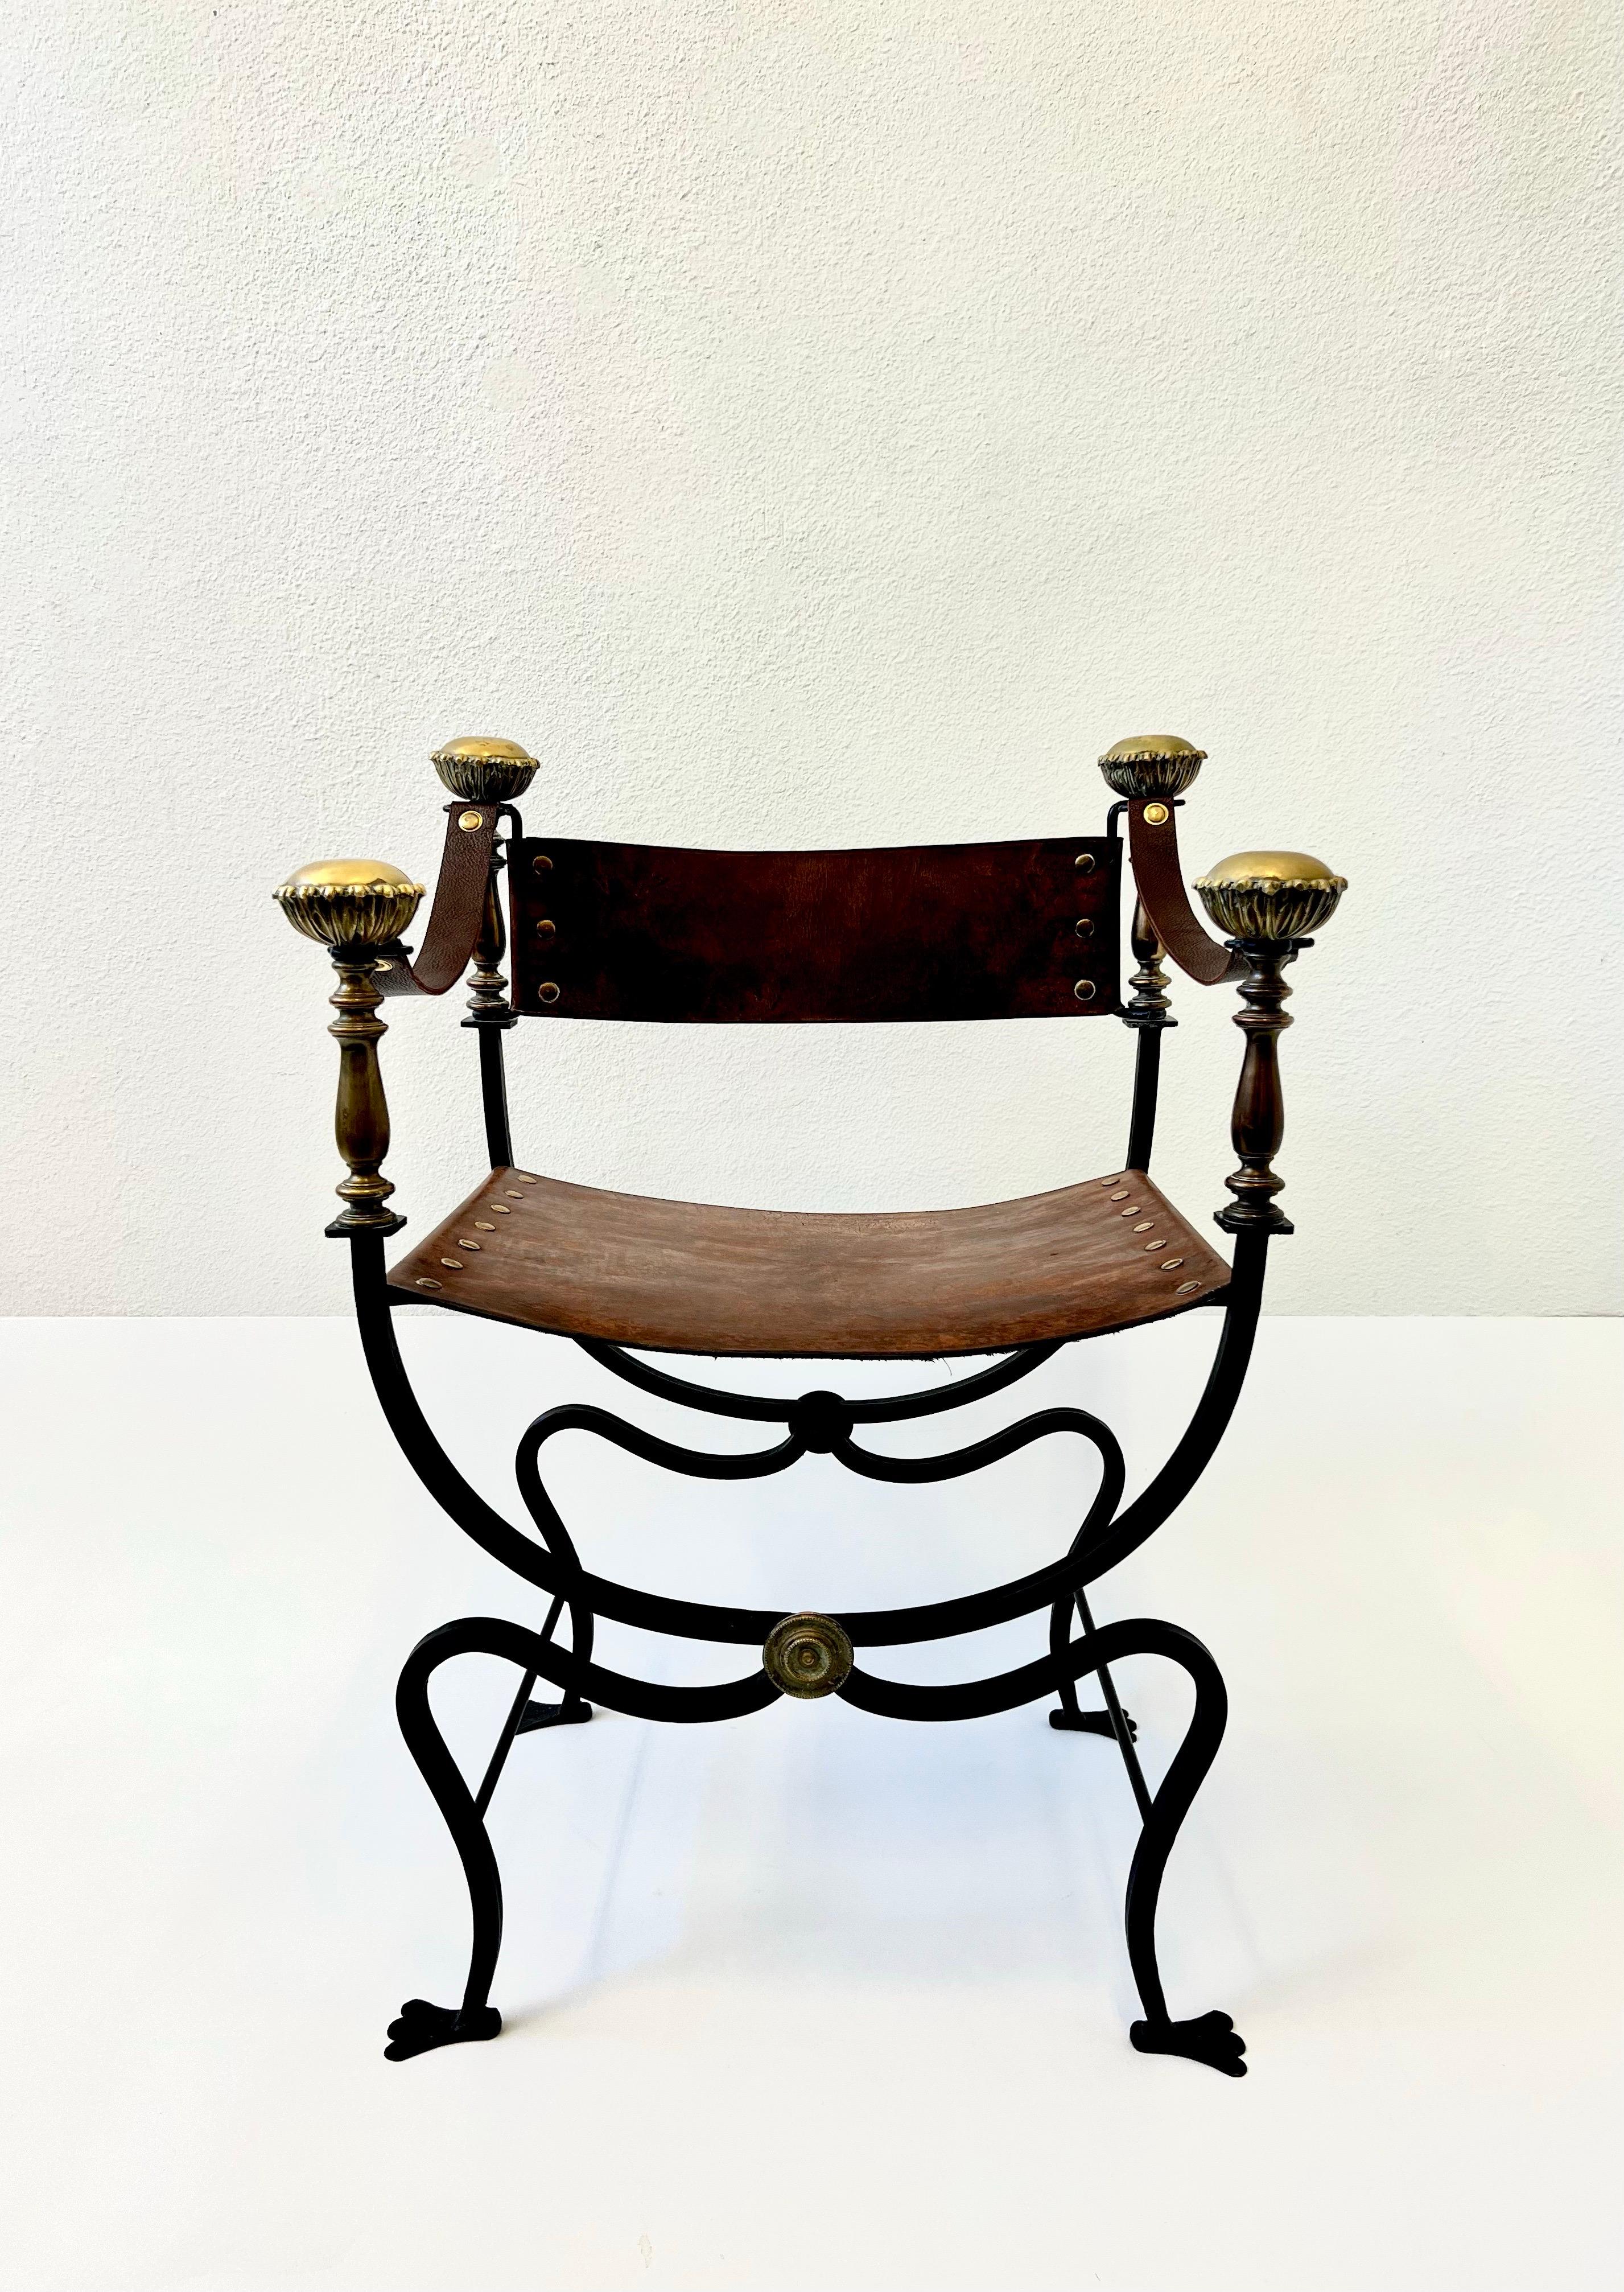 Italian black iron and leather with brass details Campaign chair from the 1960’s. 

The frame is constructed of black lacquered forged steel with decorative brass details, the seat, back and arm rests are leather. The leather on the arm rests is